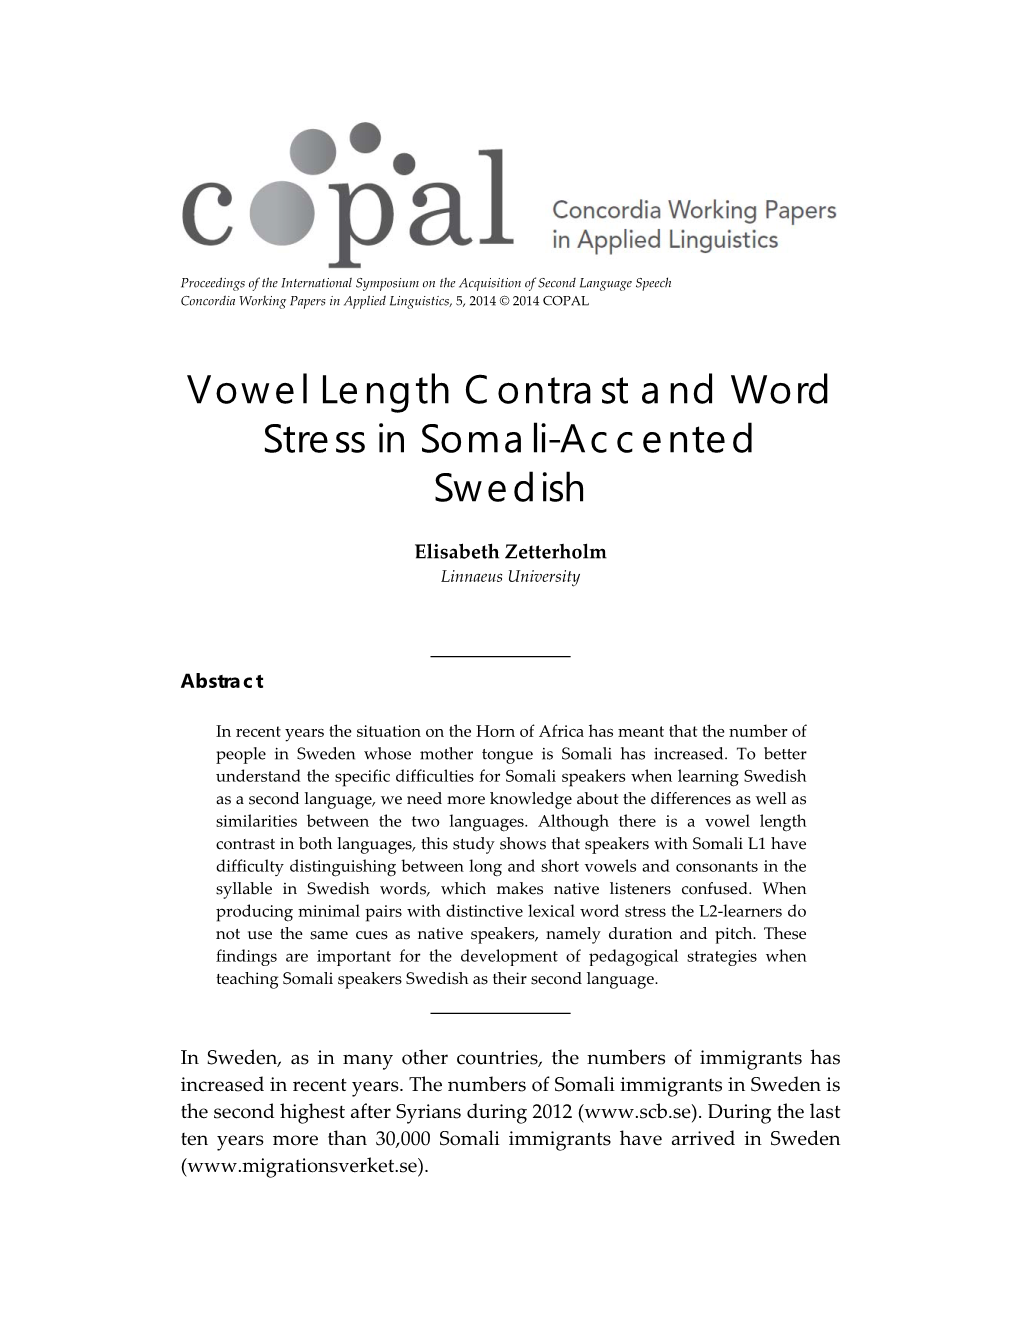 Vowel Length Contrast and Word Stress in Somali-Accented Swedish